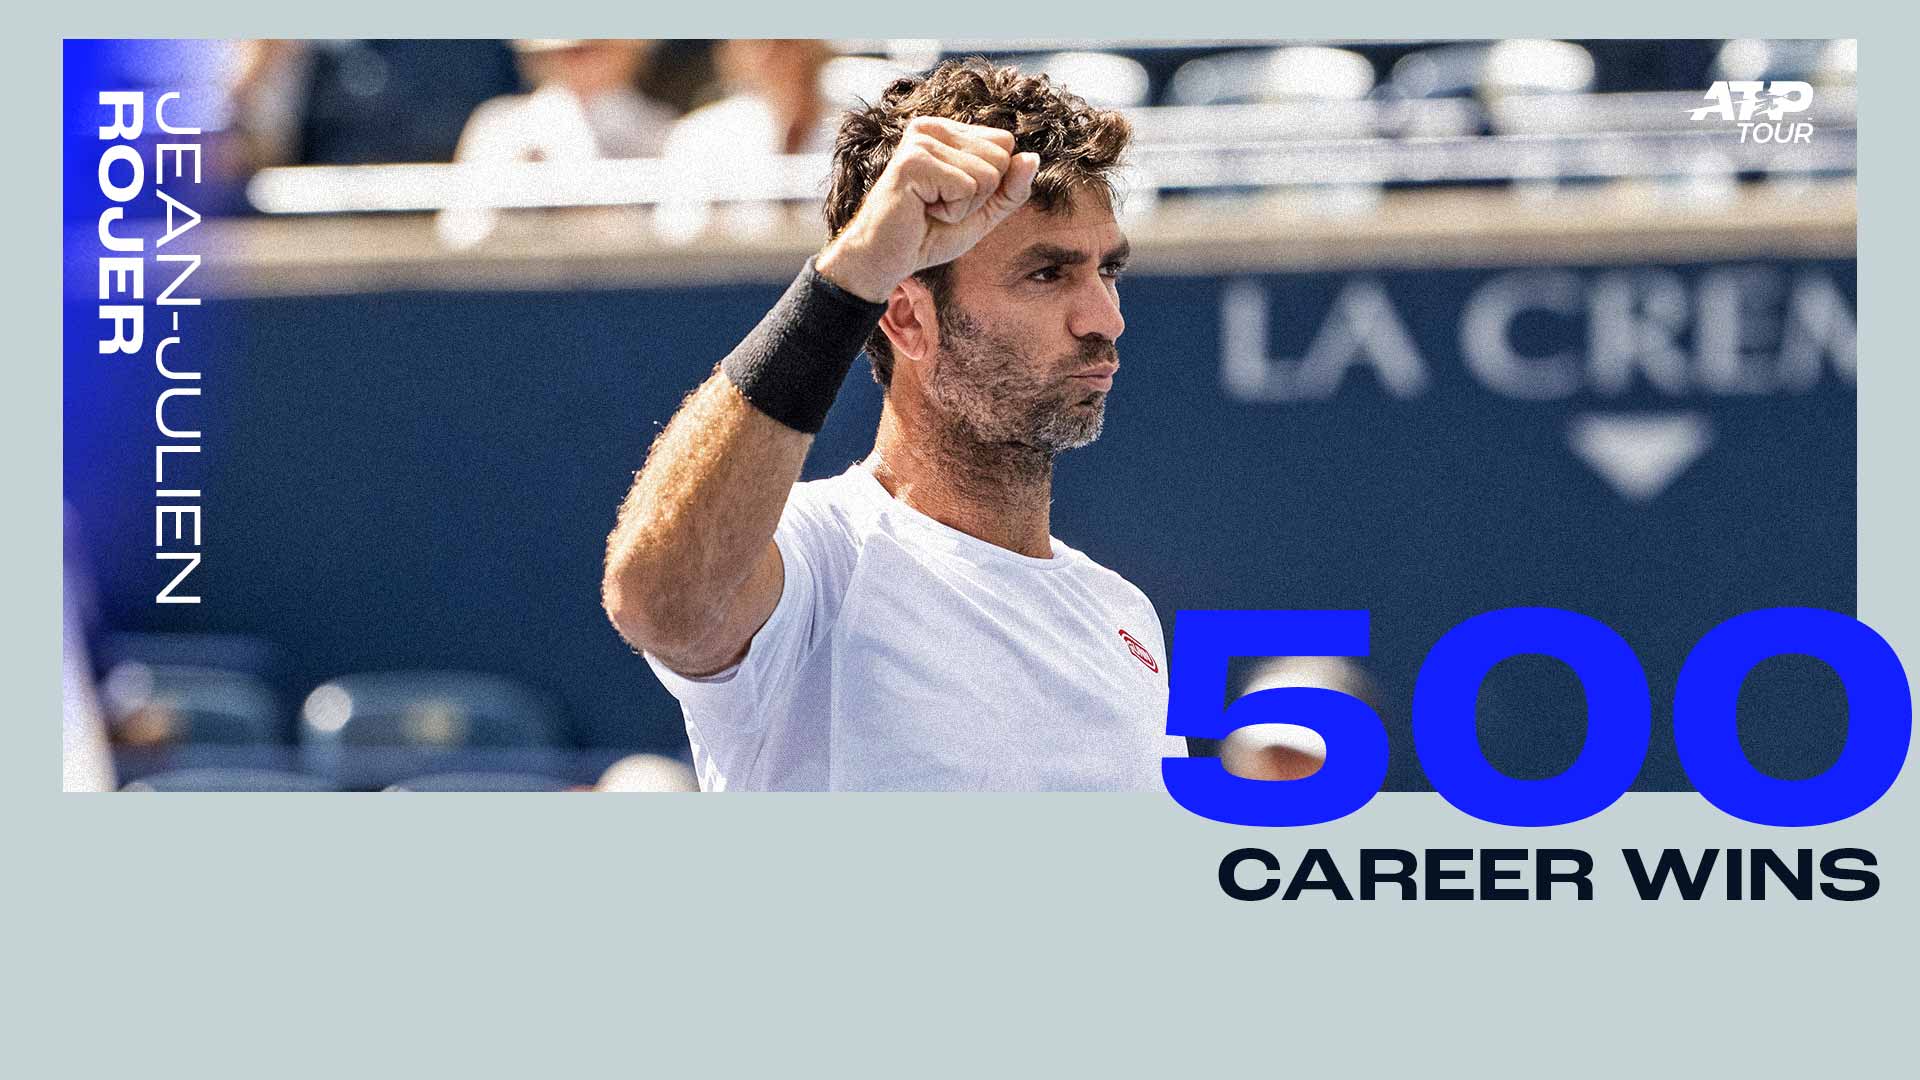 Jean-Julien Rojer claimed his 36th tour-level doubles title in Toronto.